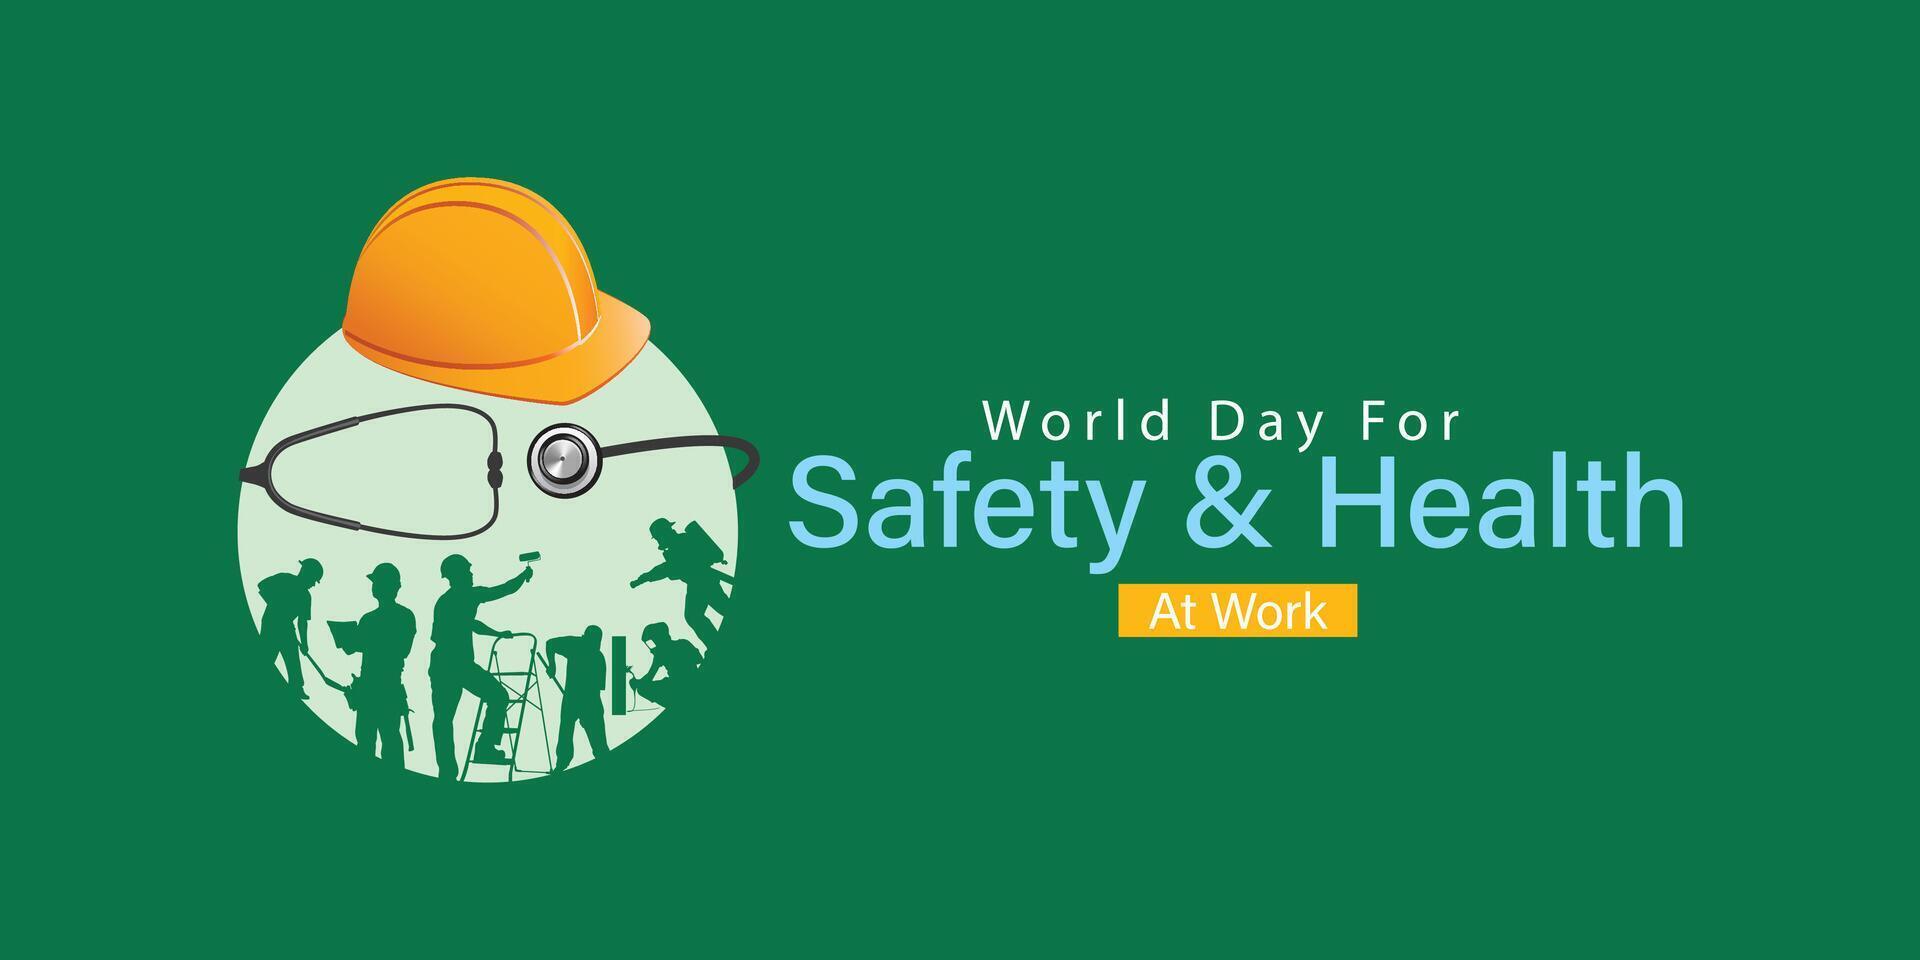 World Day for Safety and Health at Work. Construction helmet earth and stethoscope for safe and healthy work day, work safety awareness template for banner, card, background, safety and health sign vector